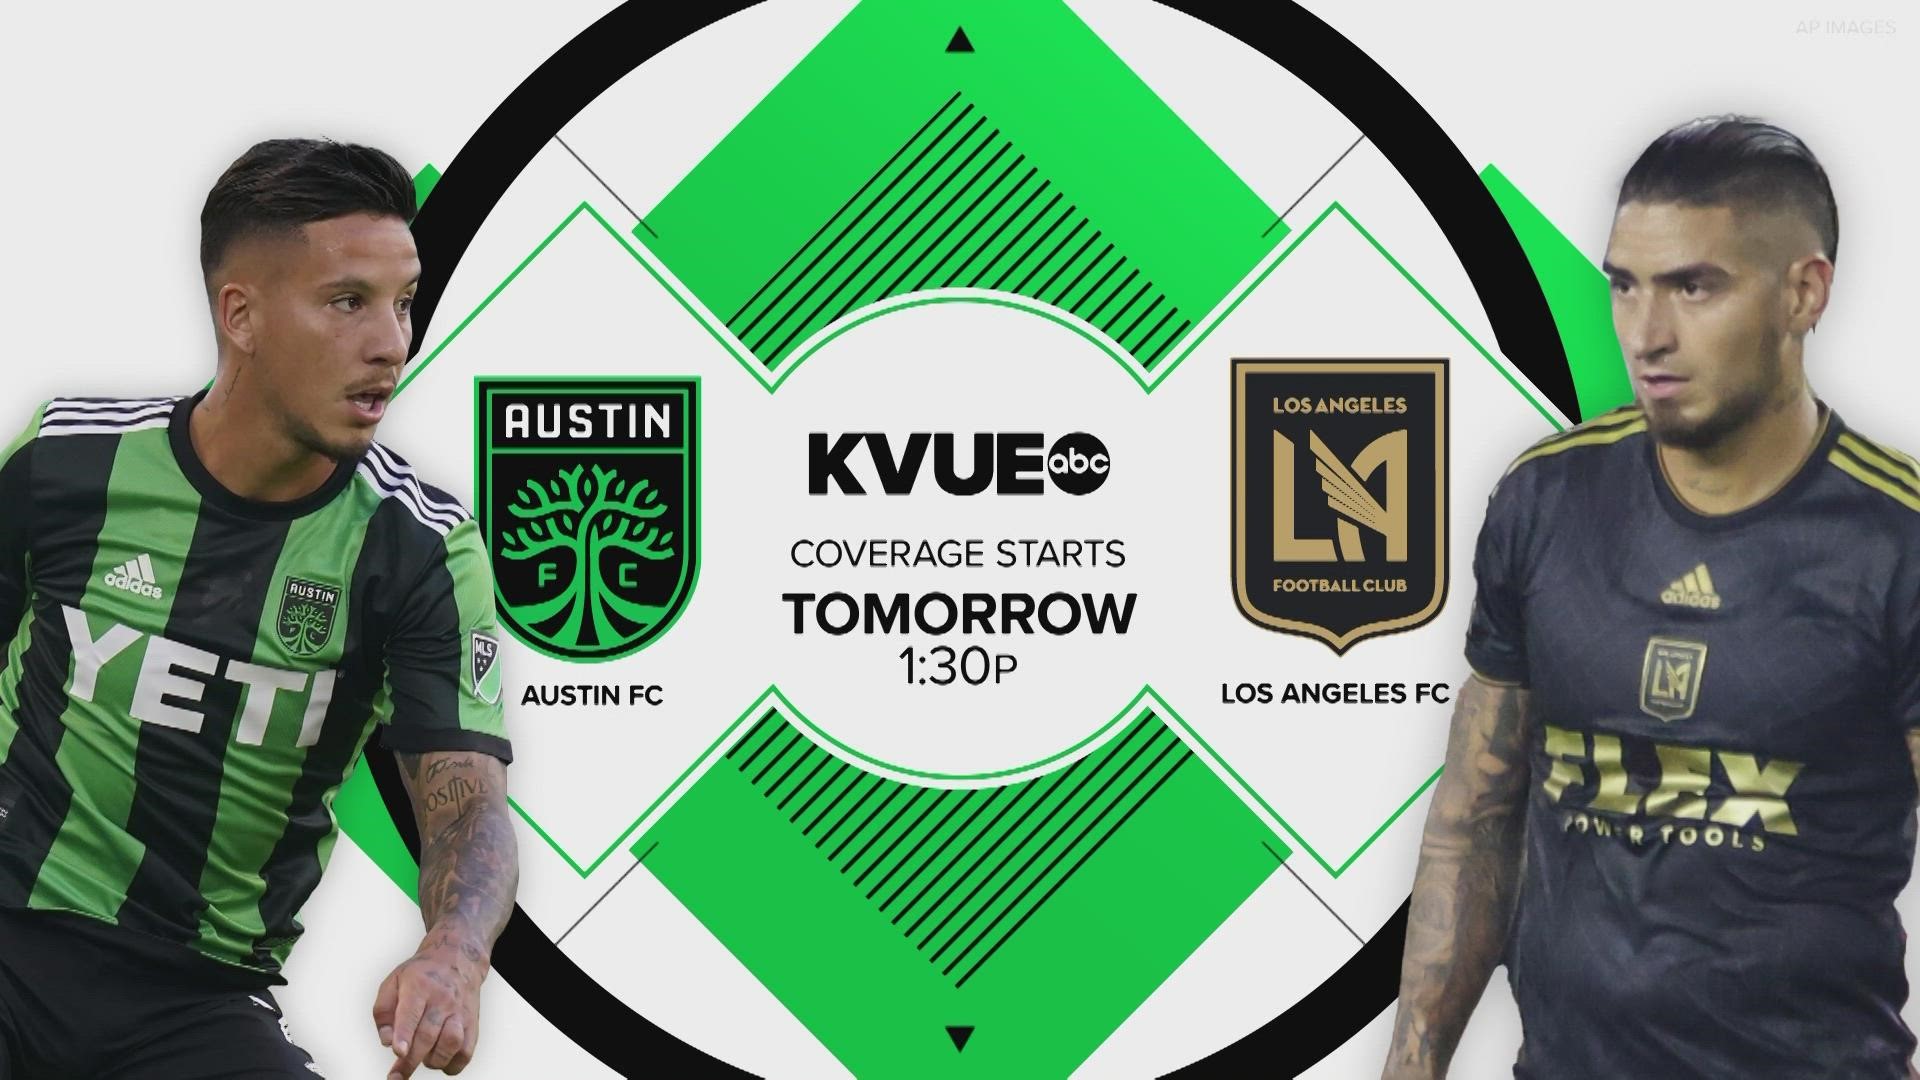 Tomorrow graphic for Austin FC KVUE coverage